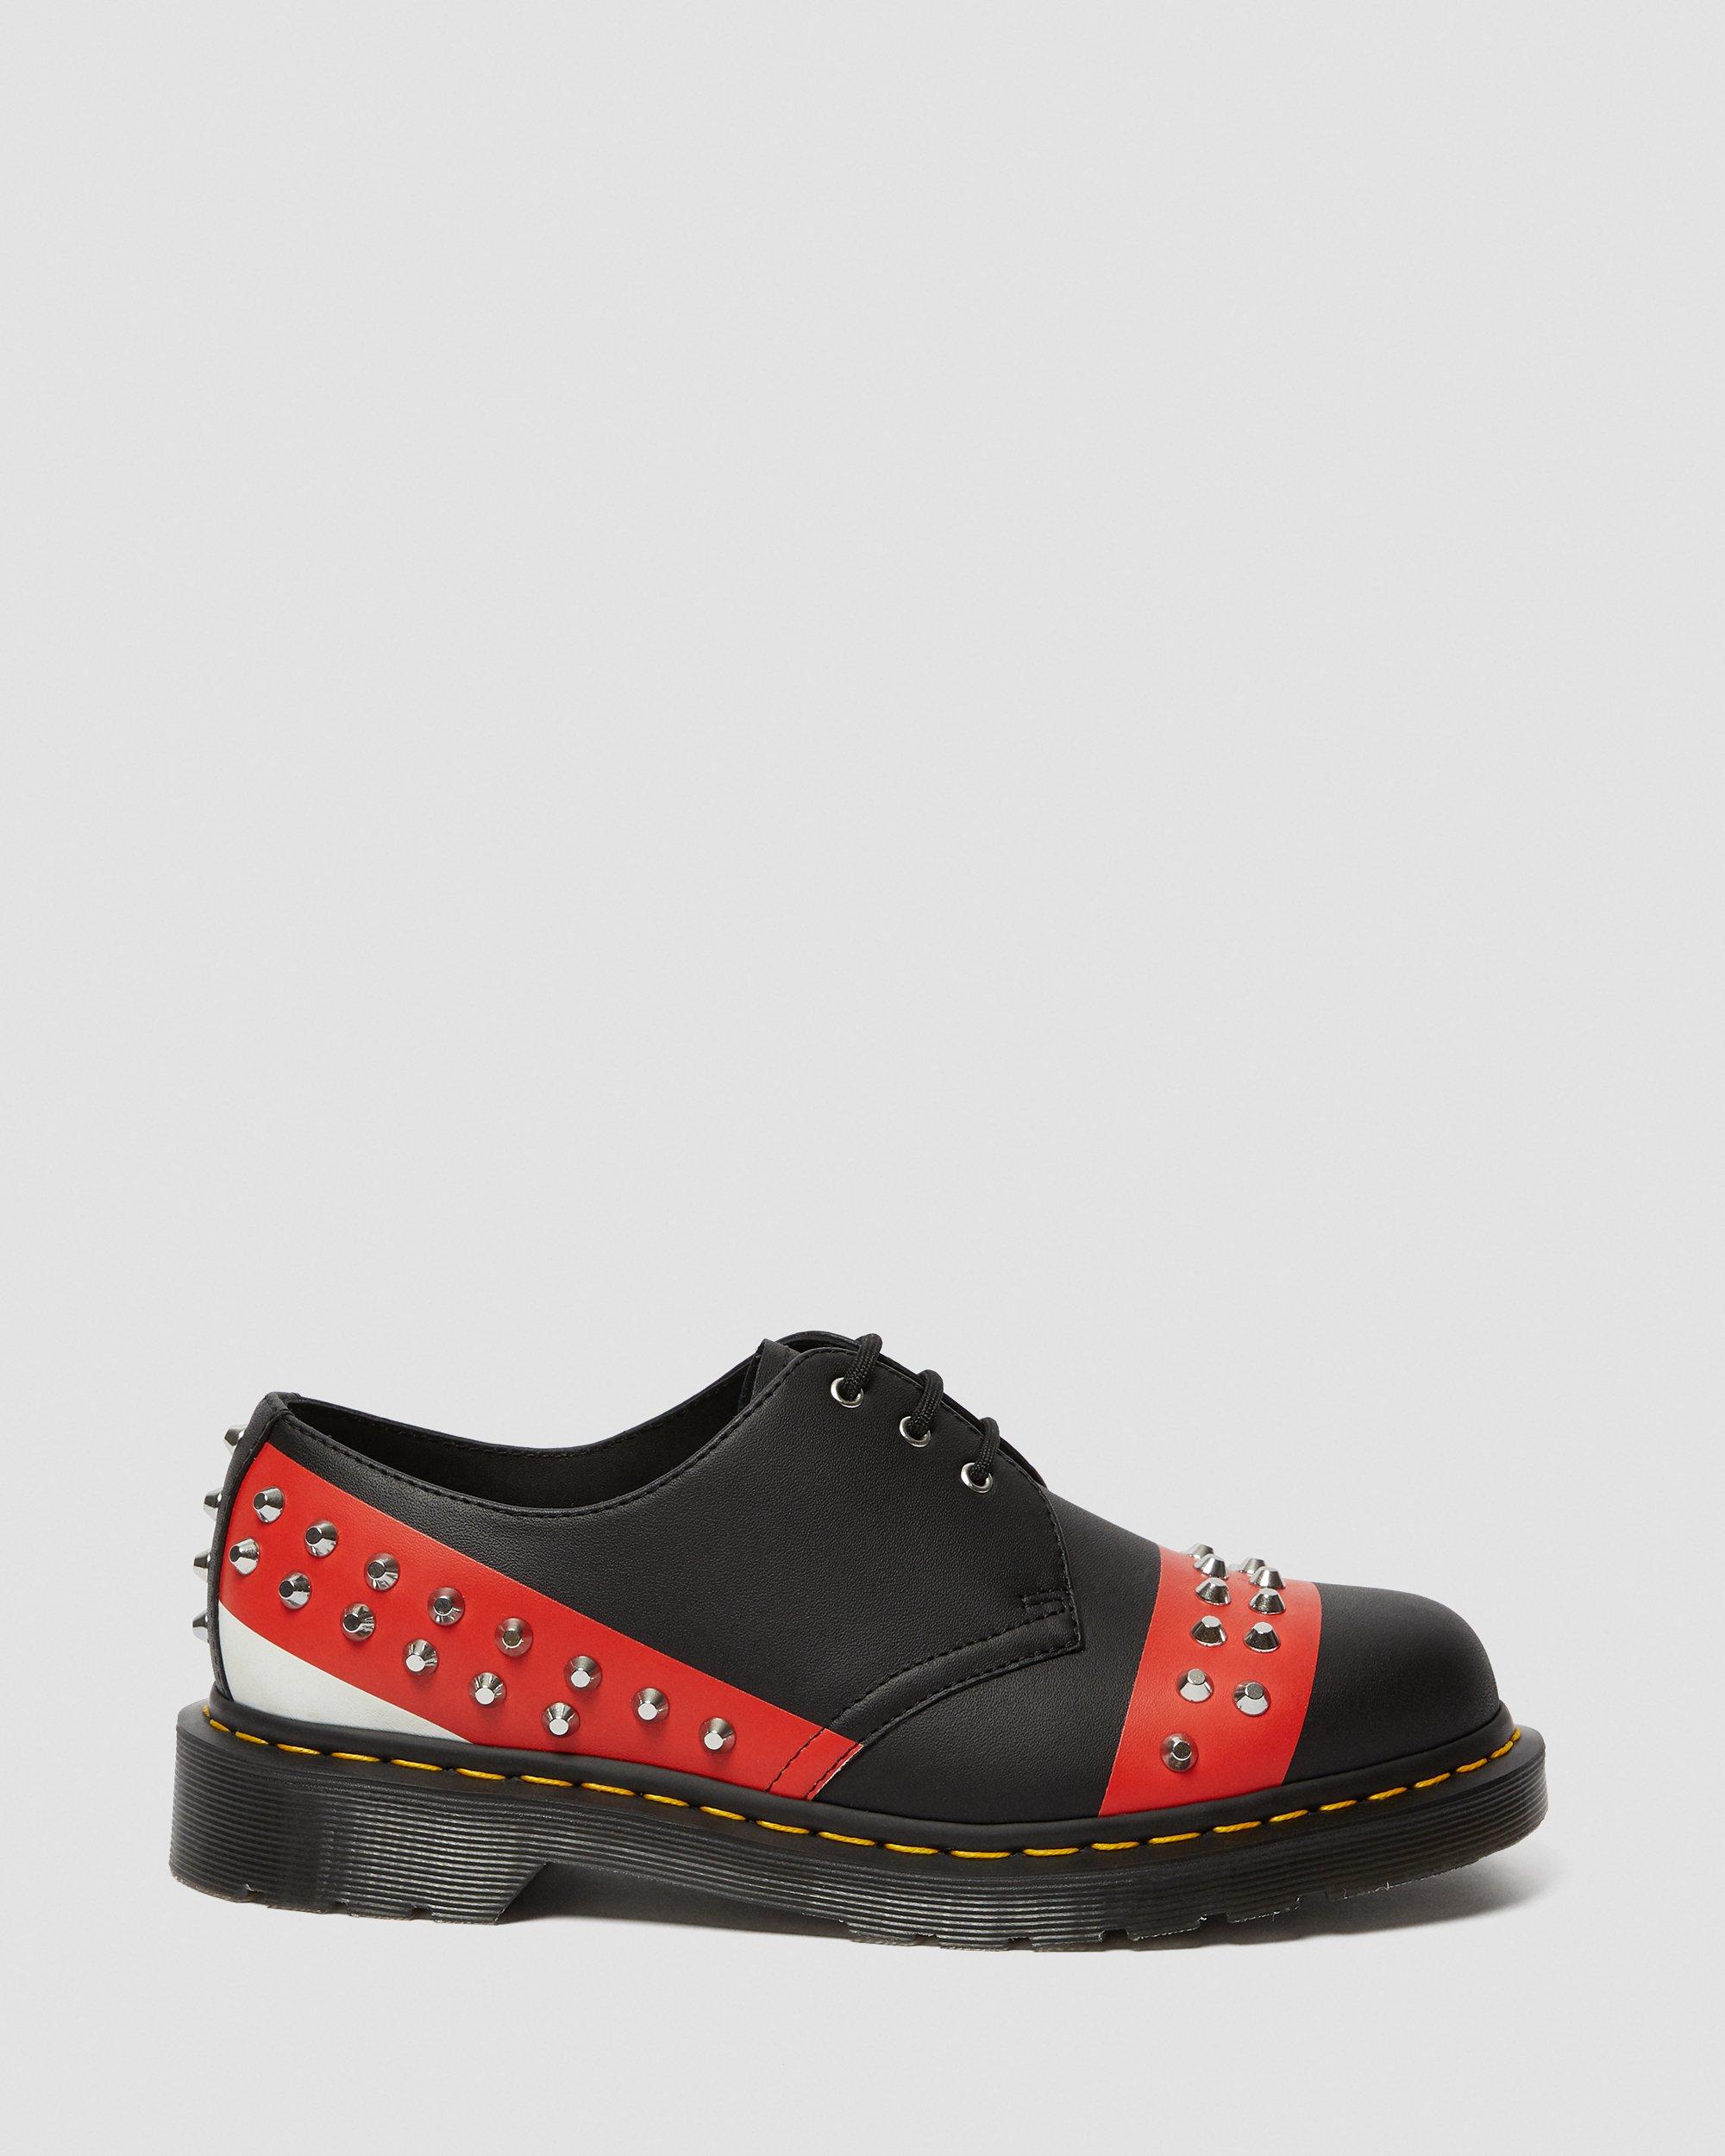 DR MARTENS 1461 Leather Studded Oxford Shoes